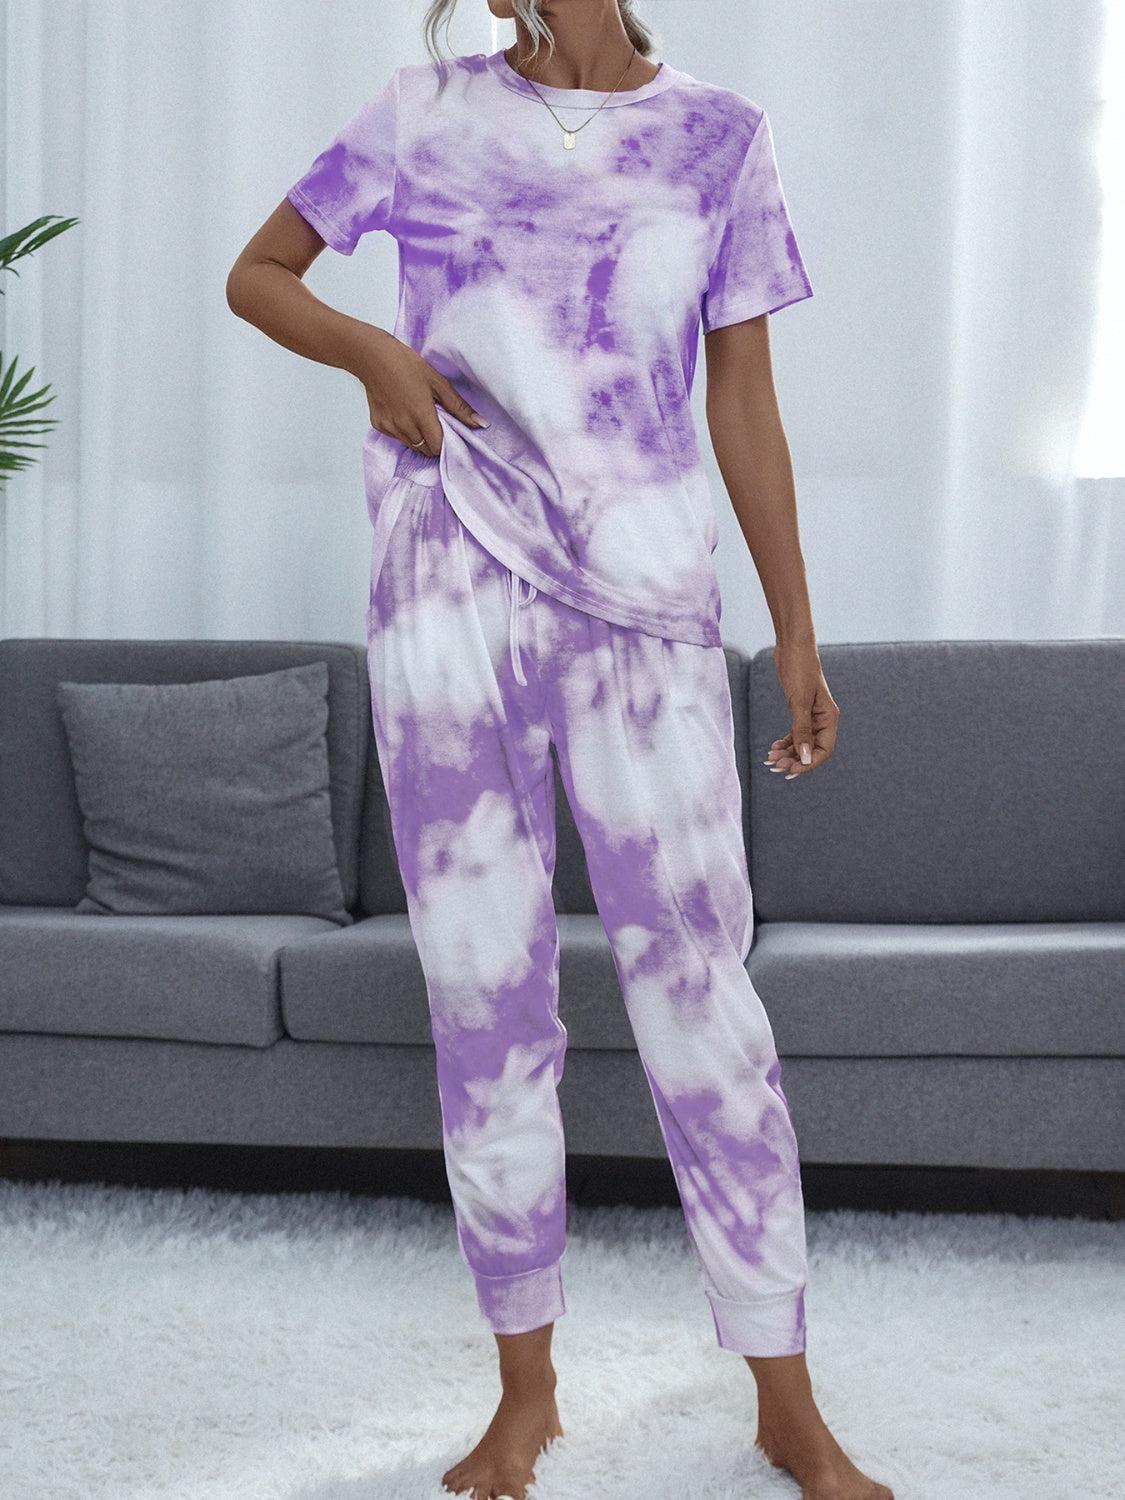 a woman in a purple and white tie dye outfit